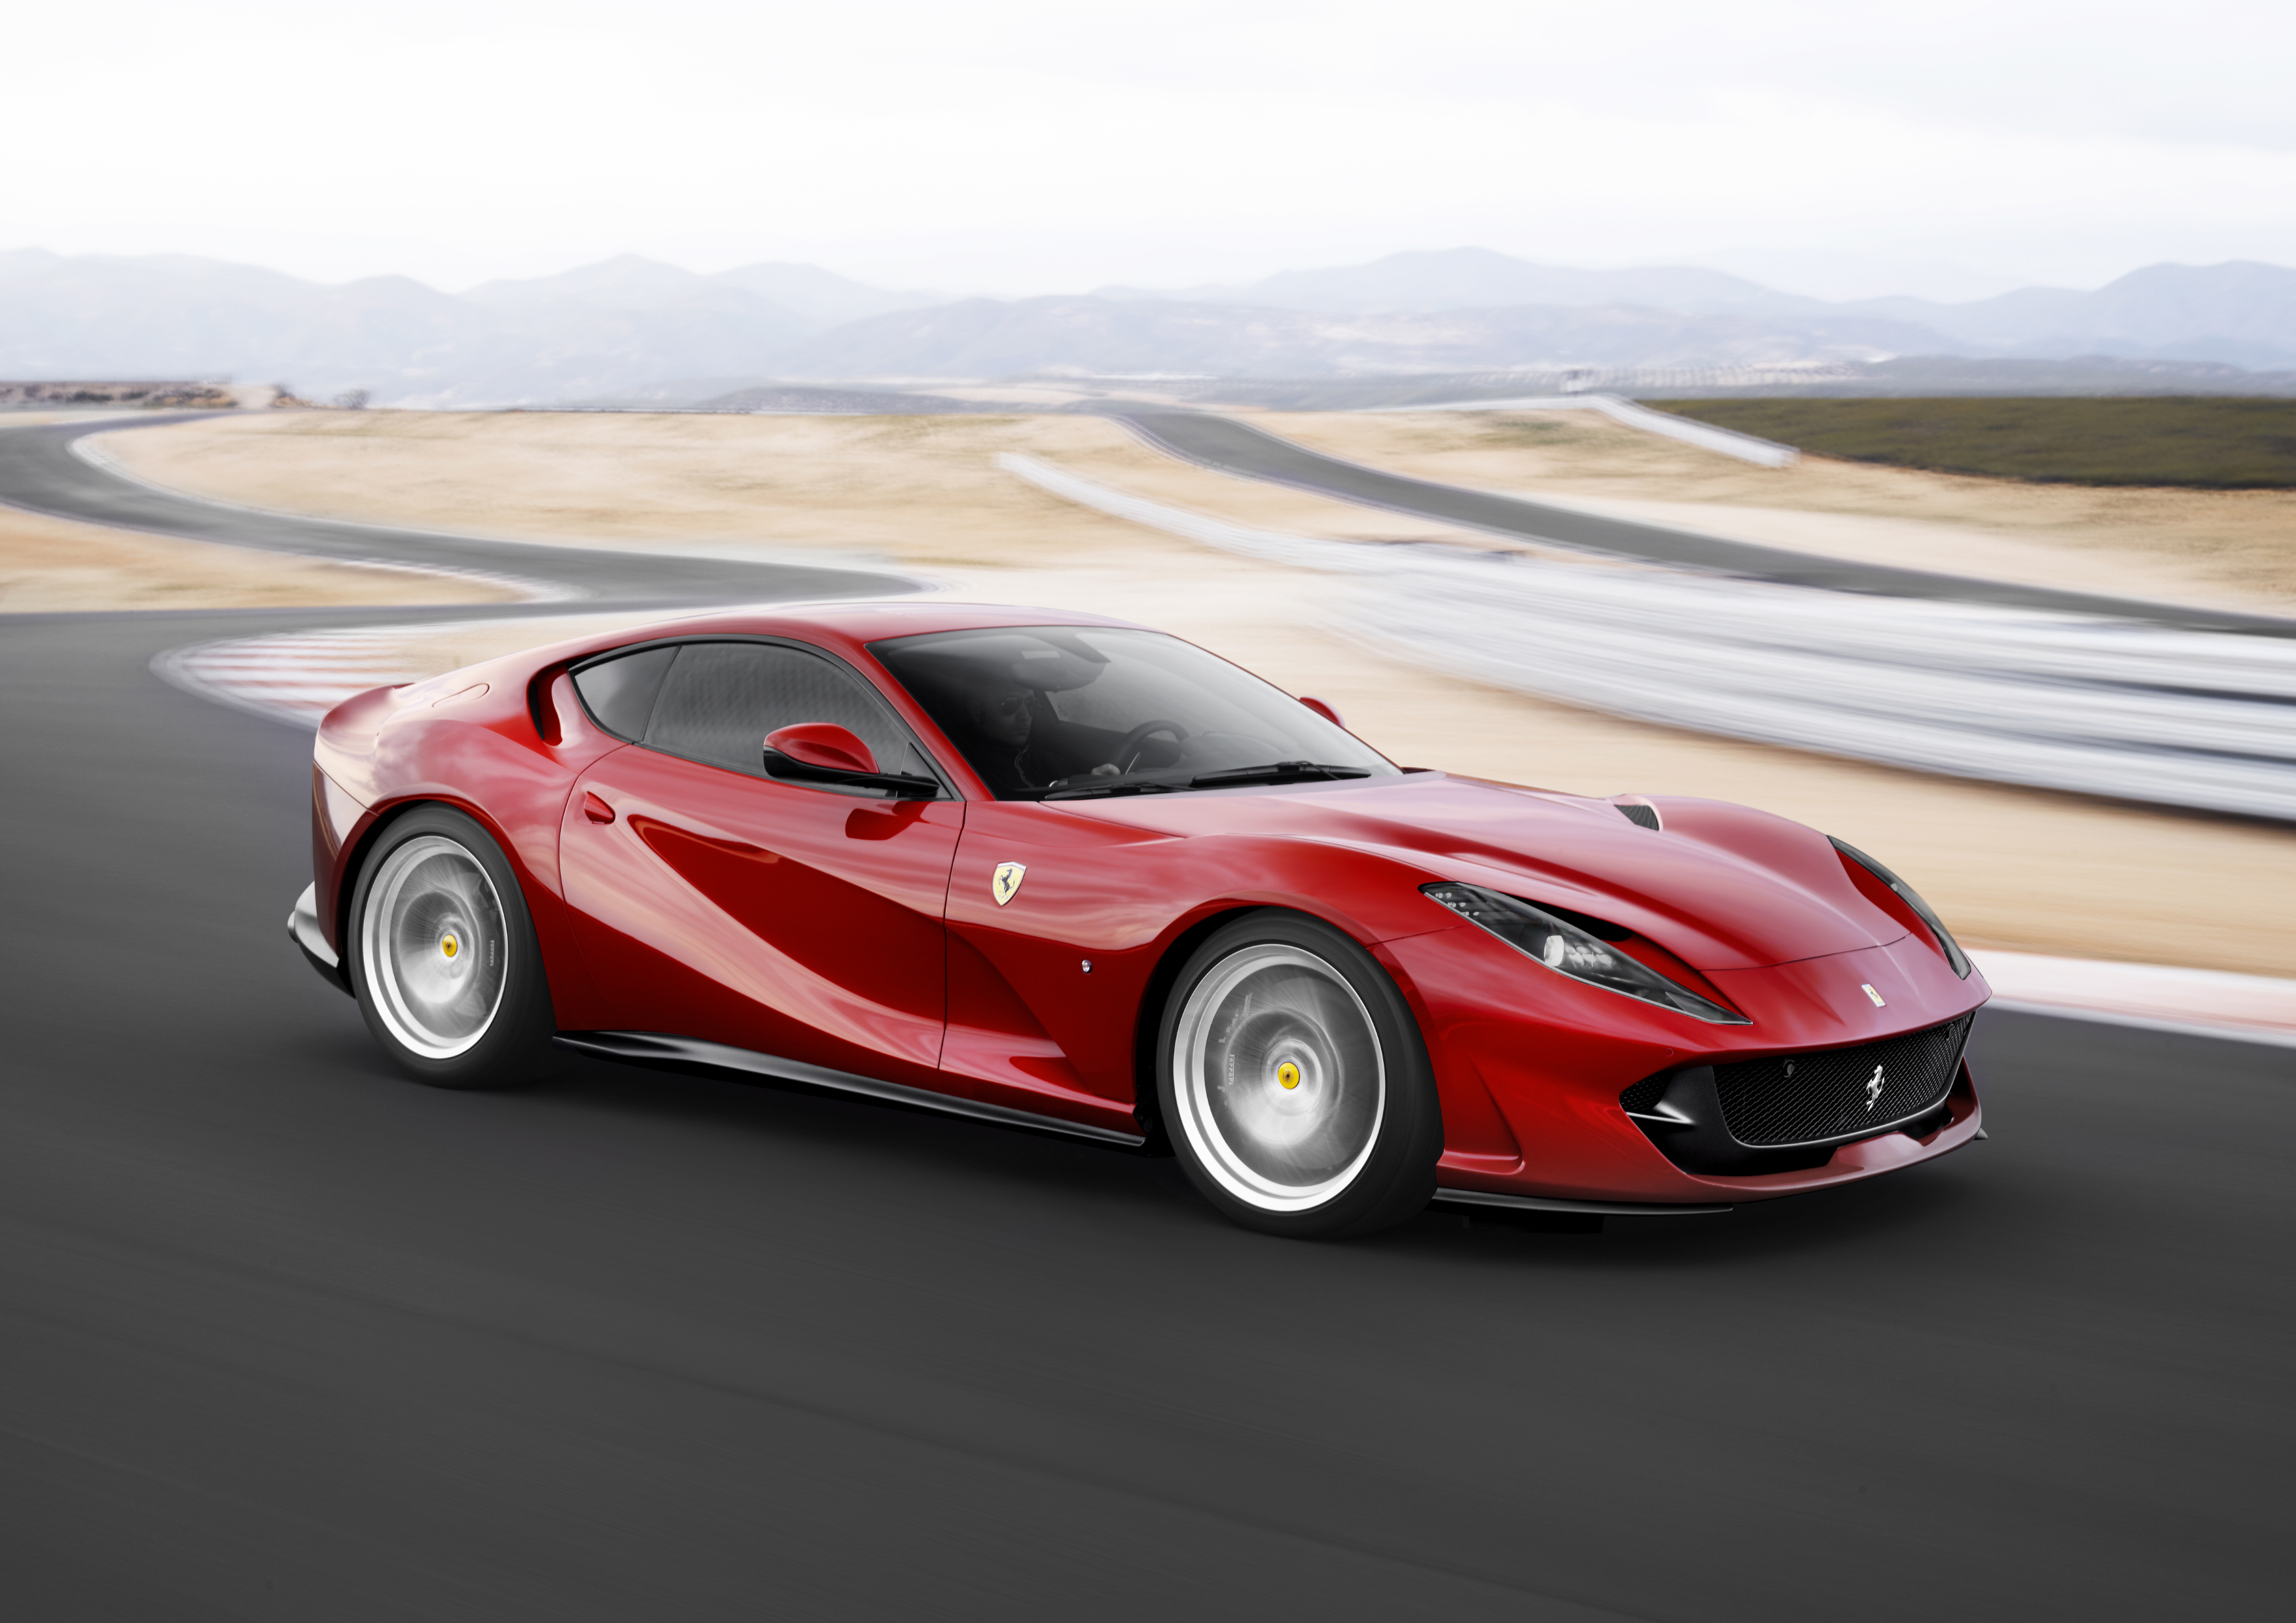 A red Ferrari 812 Superfast taking a turn at a racetrack